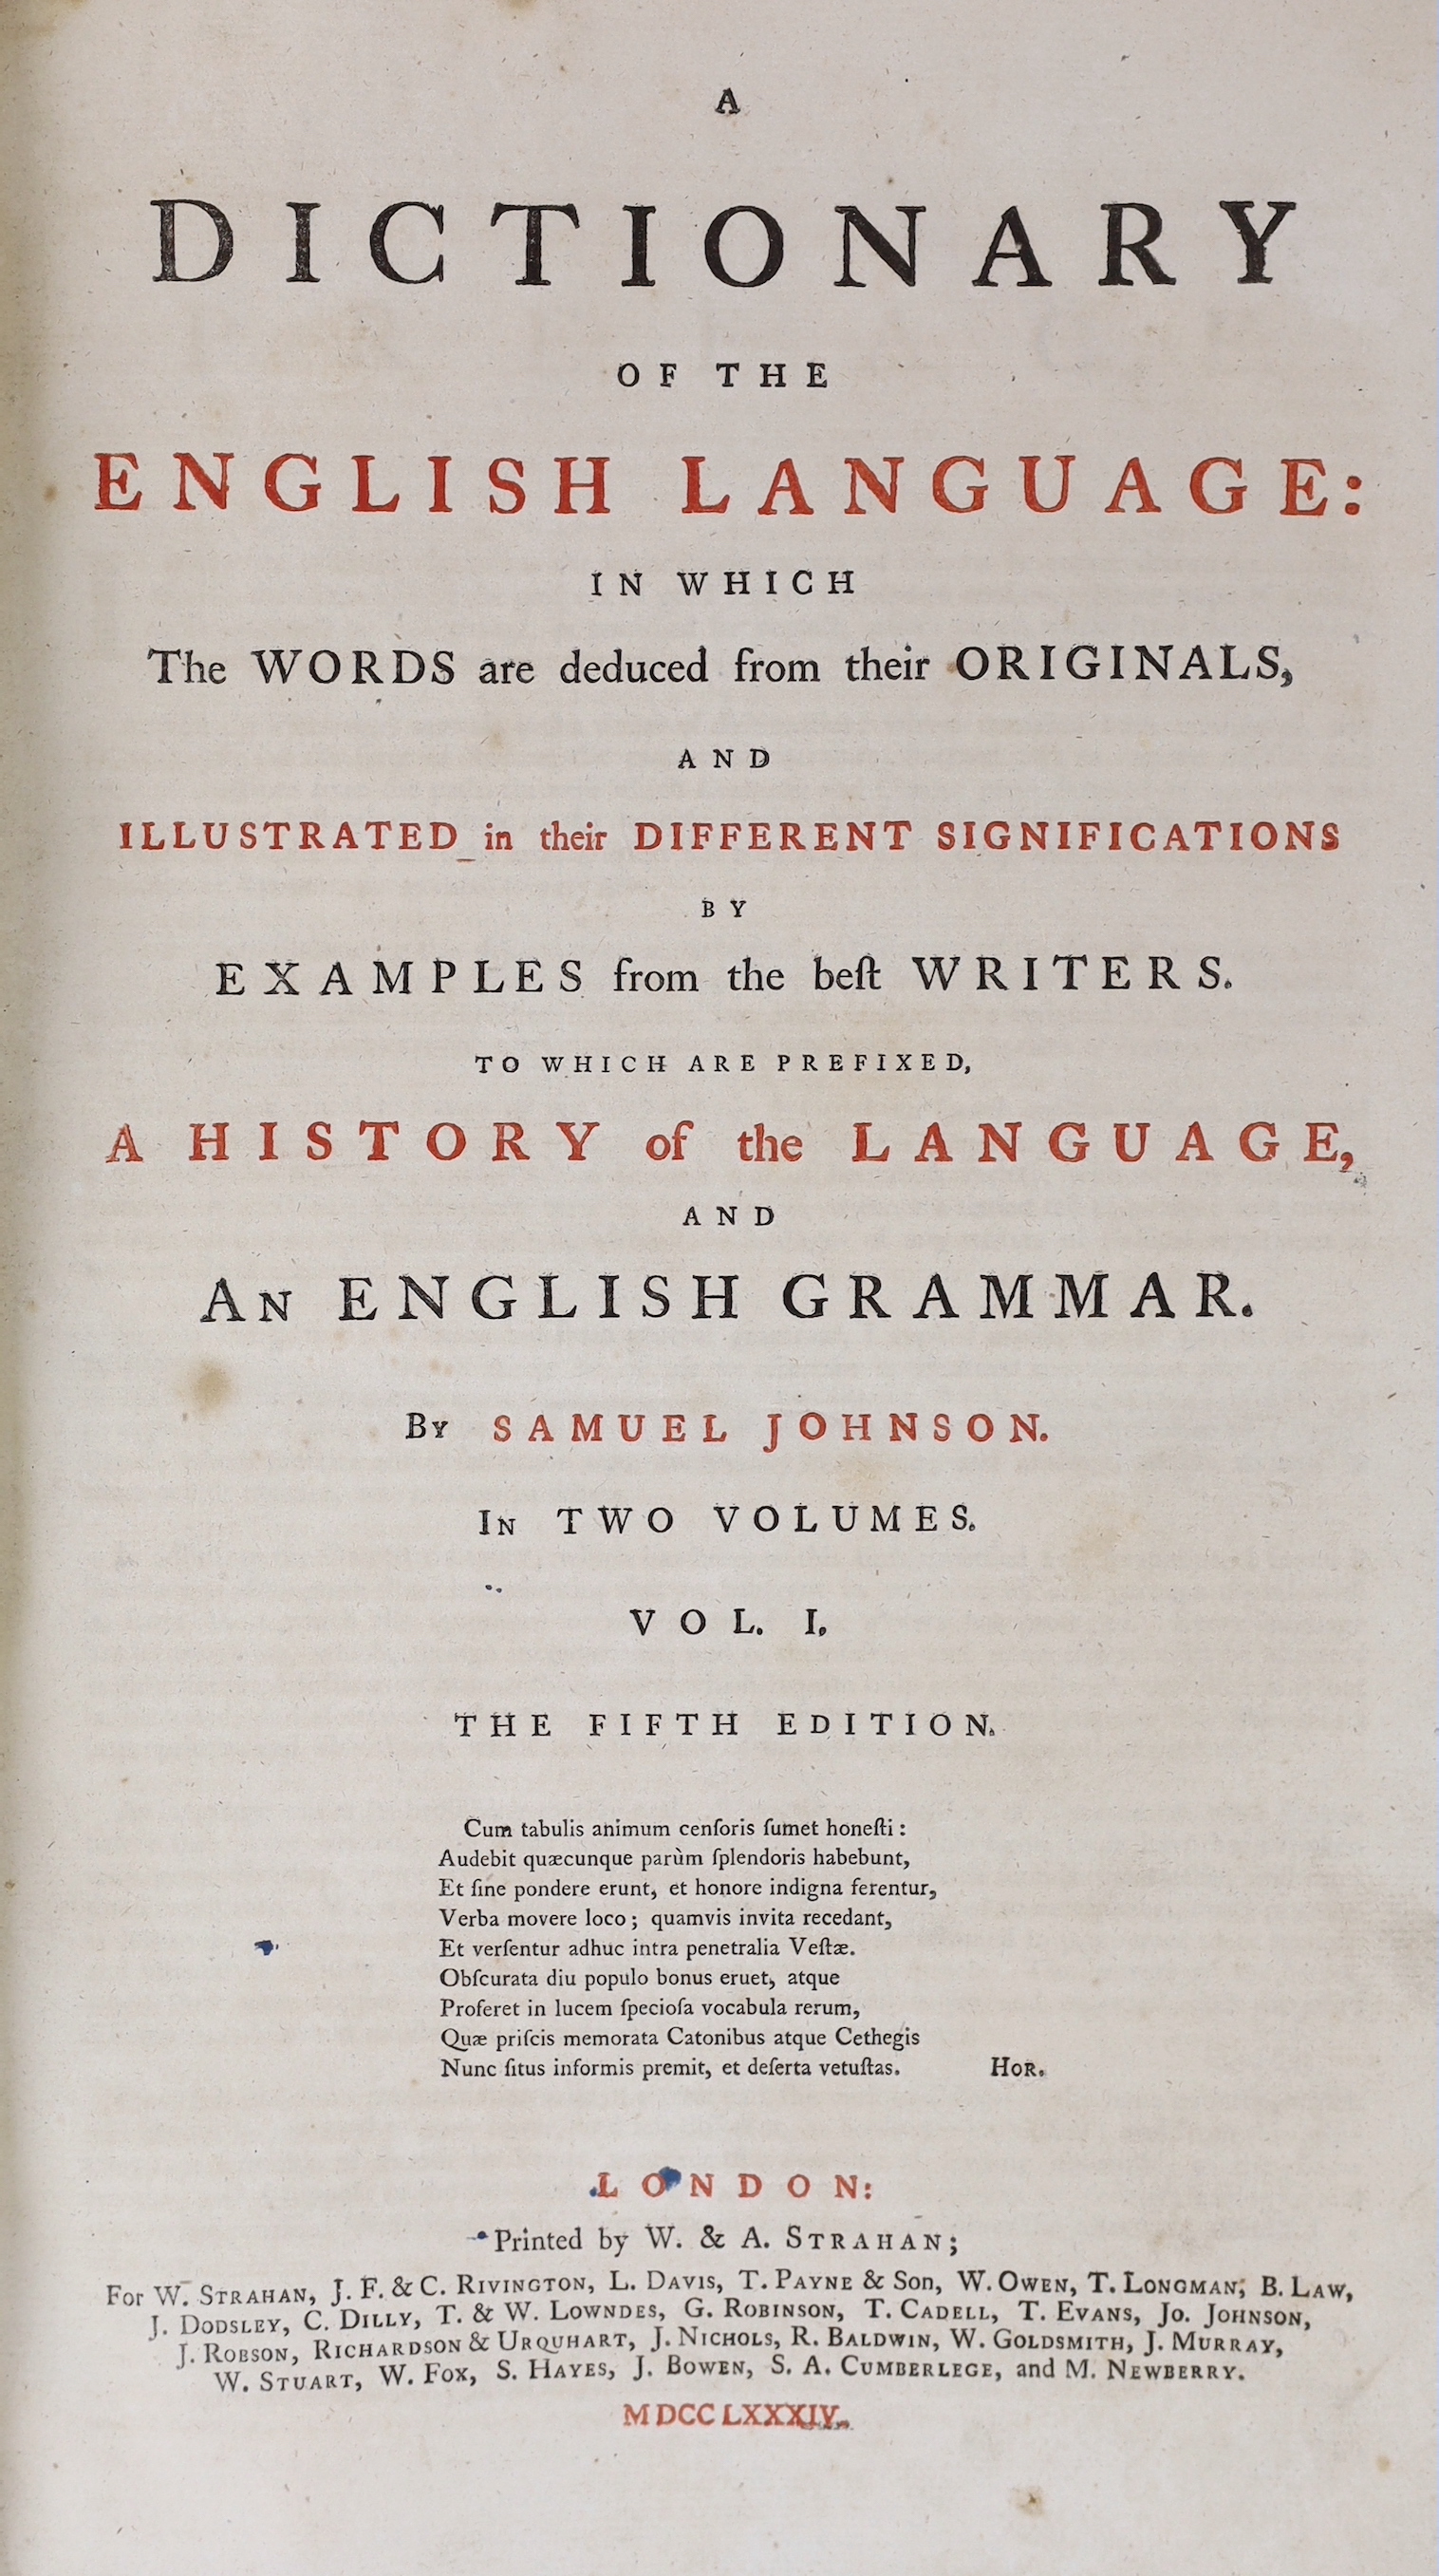 Johnson, Samuel - A Dictionary of the English Language ... To which are prefixed, a History of the Language, and an English Grammar ... 5th edition, 2 vols. titles in red and black; contemp. tree calf